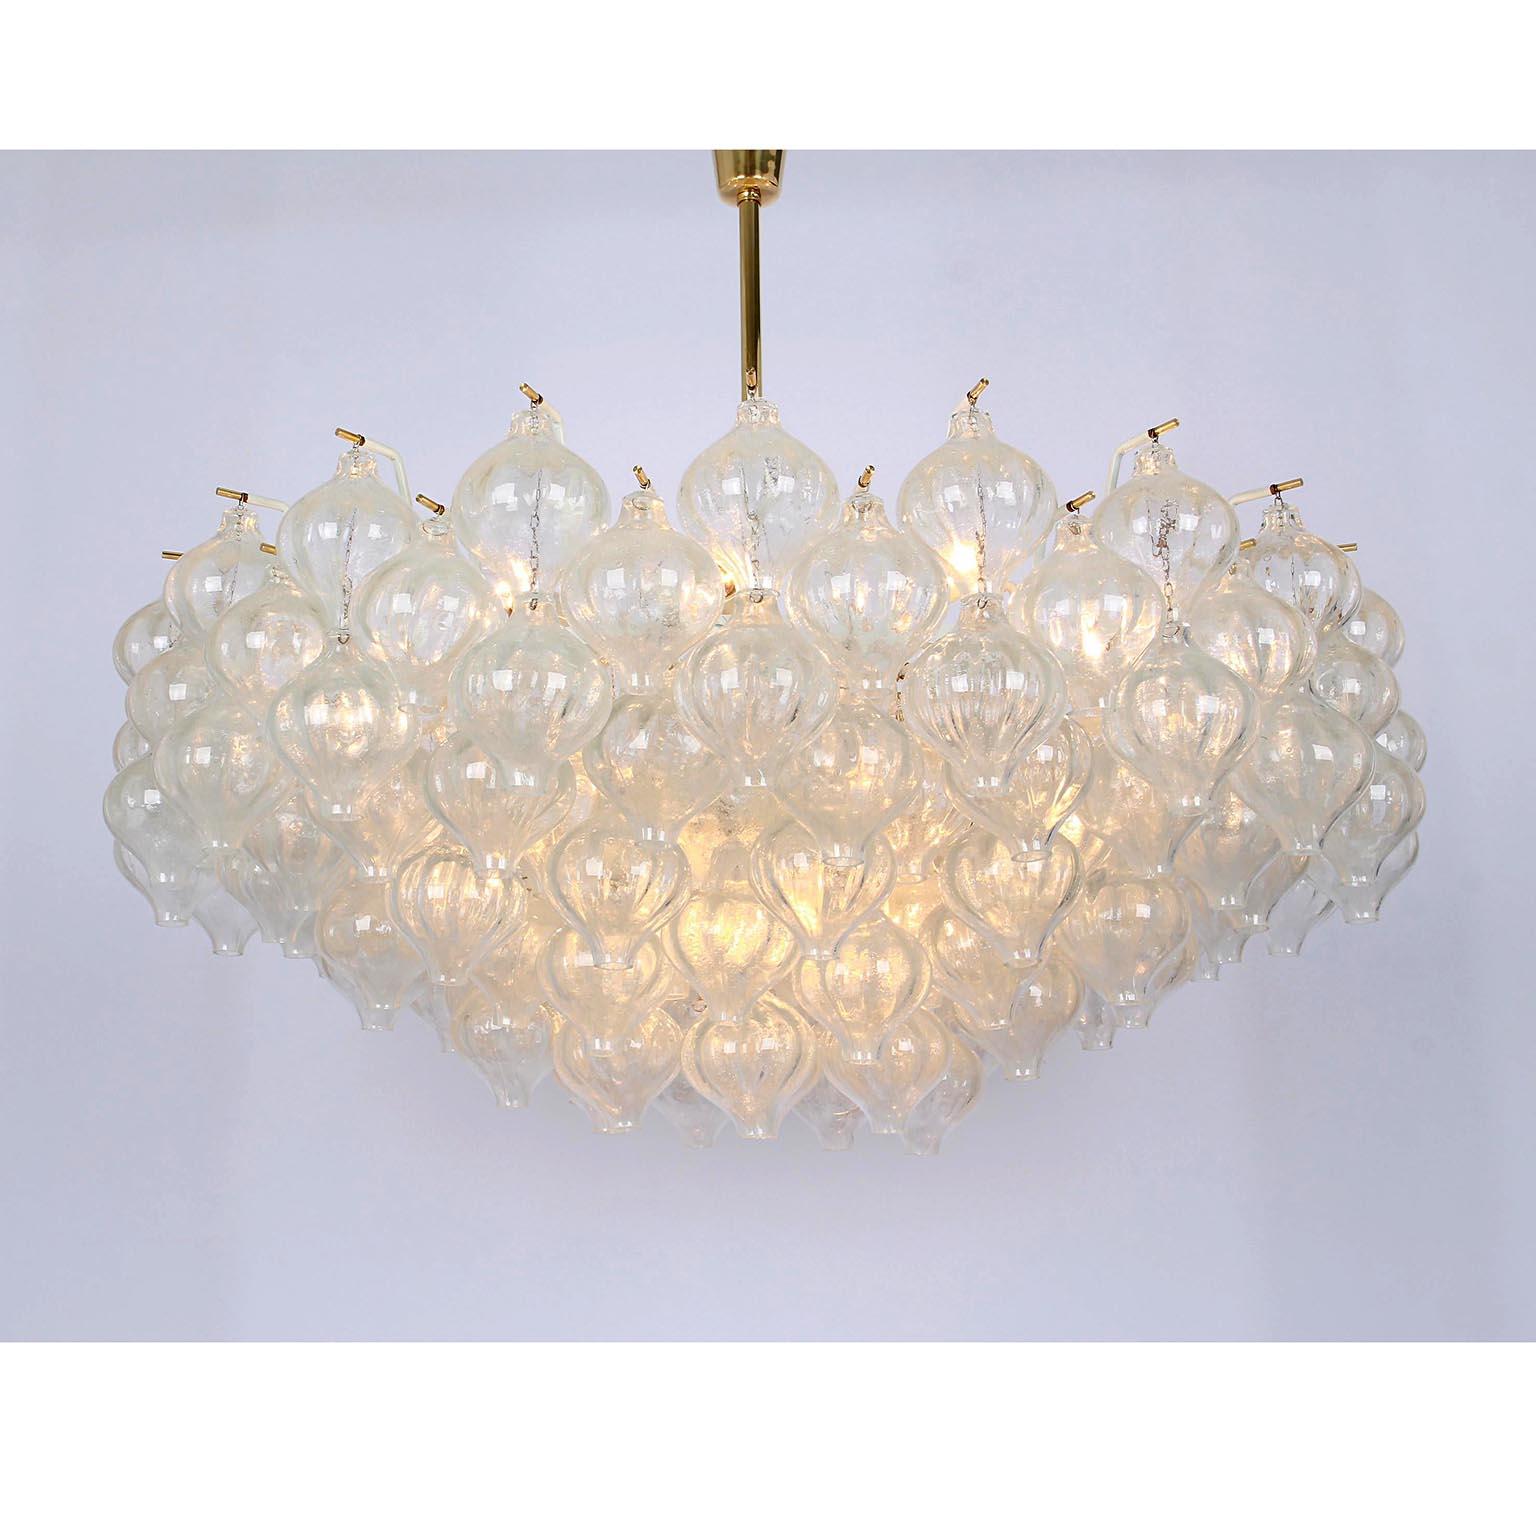 Lacquered Extra Large Chandelier Pendant Light Kalmar 'Tulipan', Murano Glass Brass, 1970 For Sale